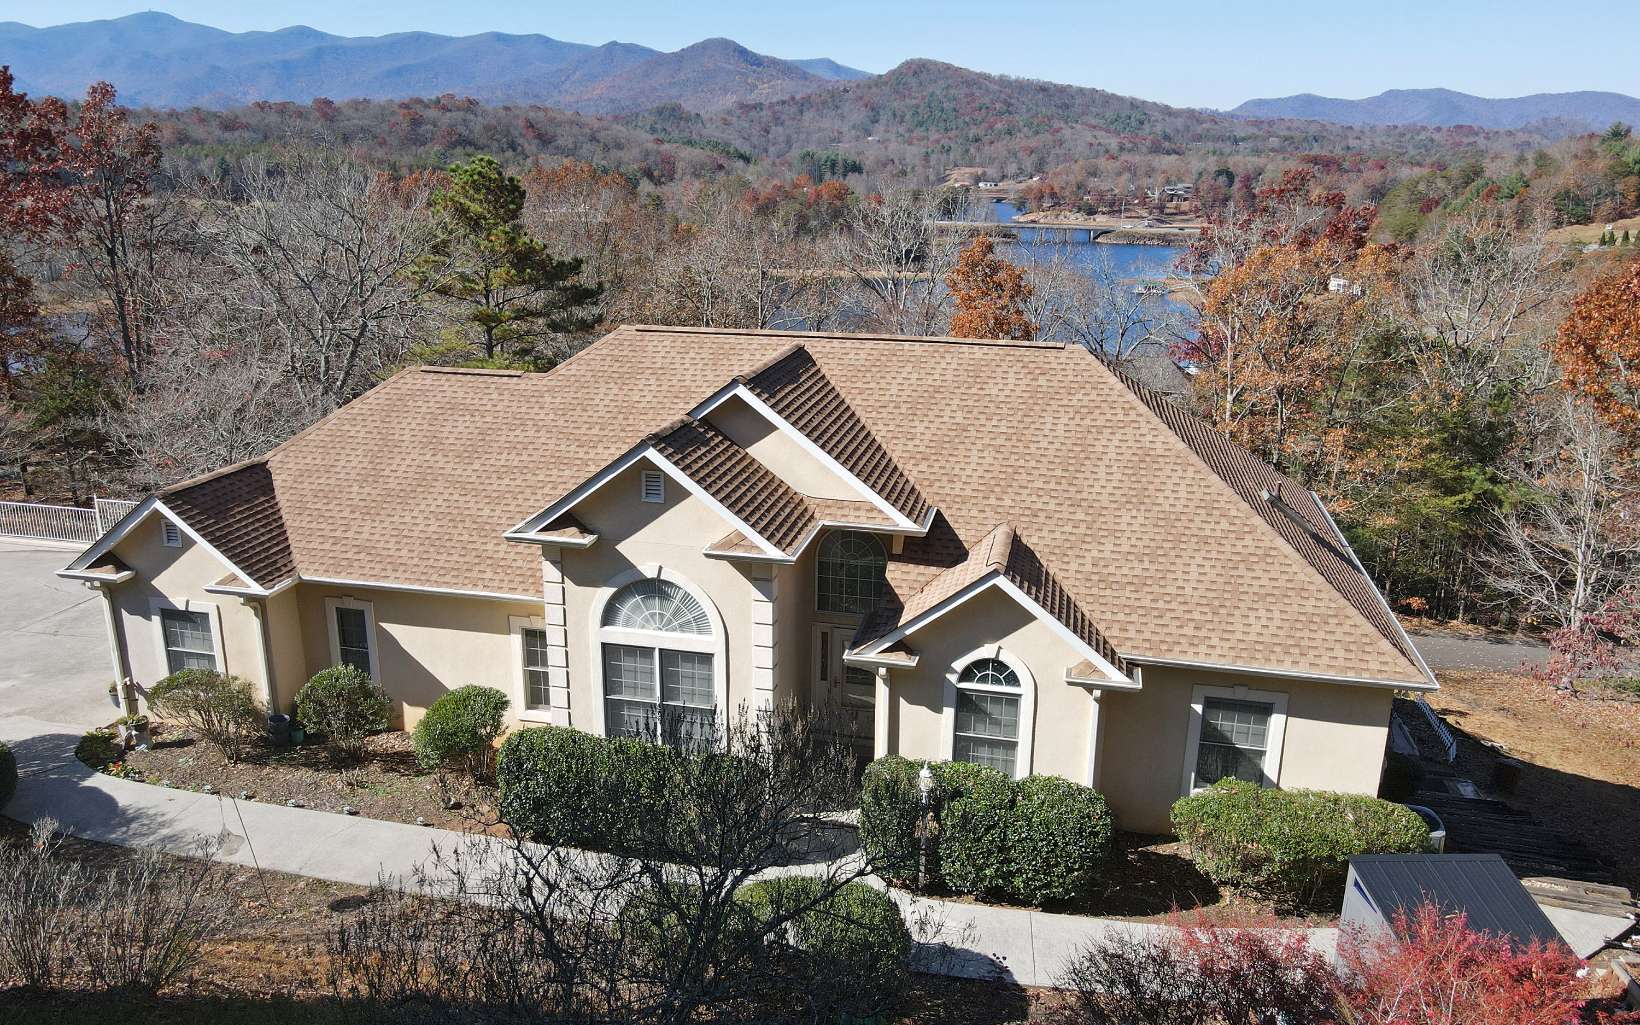 WOW! What A Retirement Home! Conveniently located 5 minutes to downtown Hiawassee And Lake Chatuge Public Boat Access. Beautifully done with ALL the extras! Two finished levels, 2 fireplaces, dining room, new roof, remodeled kitchen w/new appliances & quartz countertops ,redone master bath w/heated tile floors & a die-for shower, sauna, trey ceilings throughout and 2 car garage. Terrance level could be mother-in-law suite. A MUST SEE with building cost so expensive.